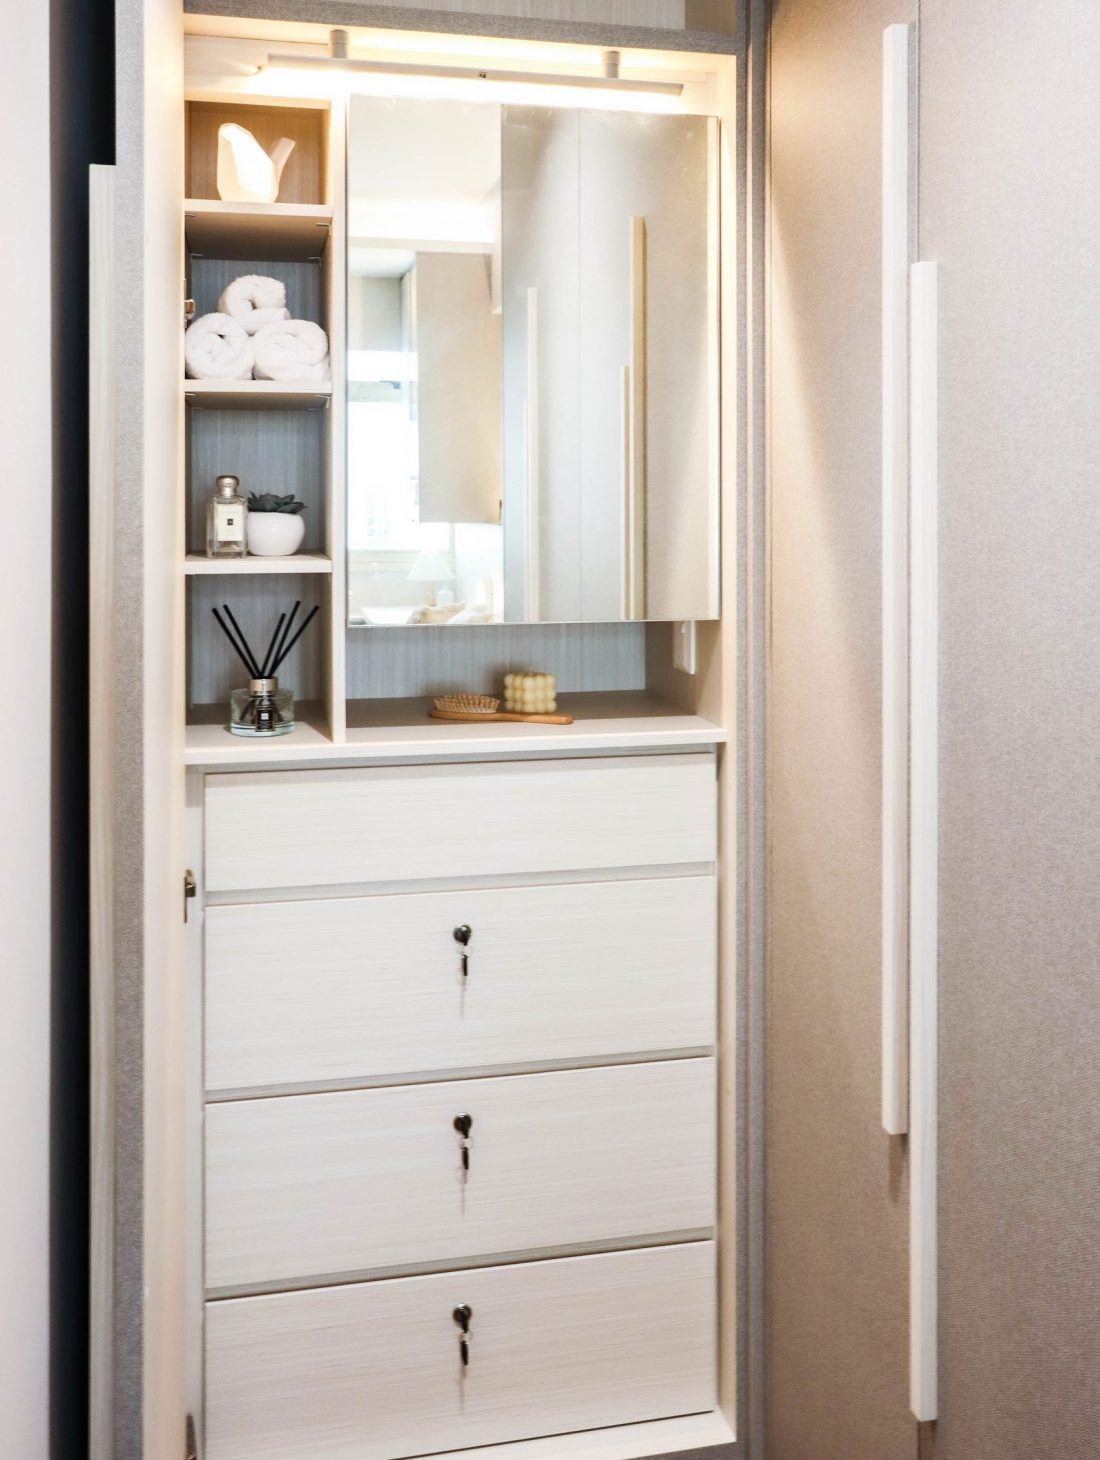 HDB Resale Wardrobe Design with Mirror and shelves